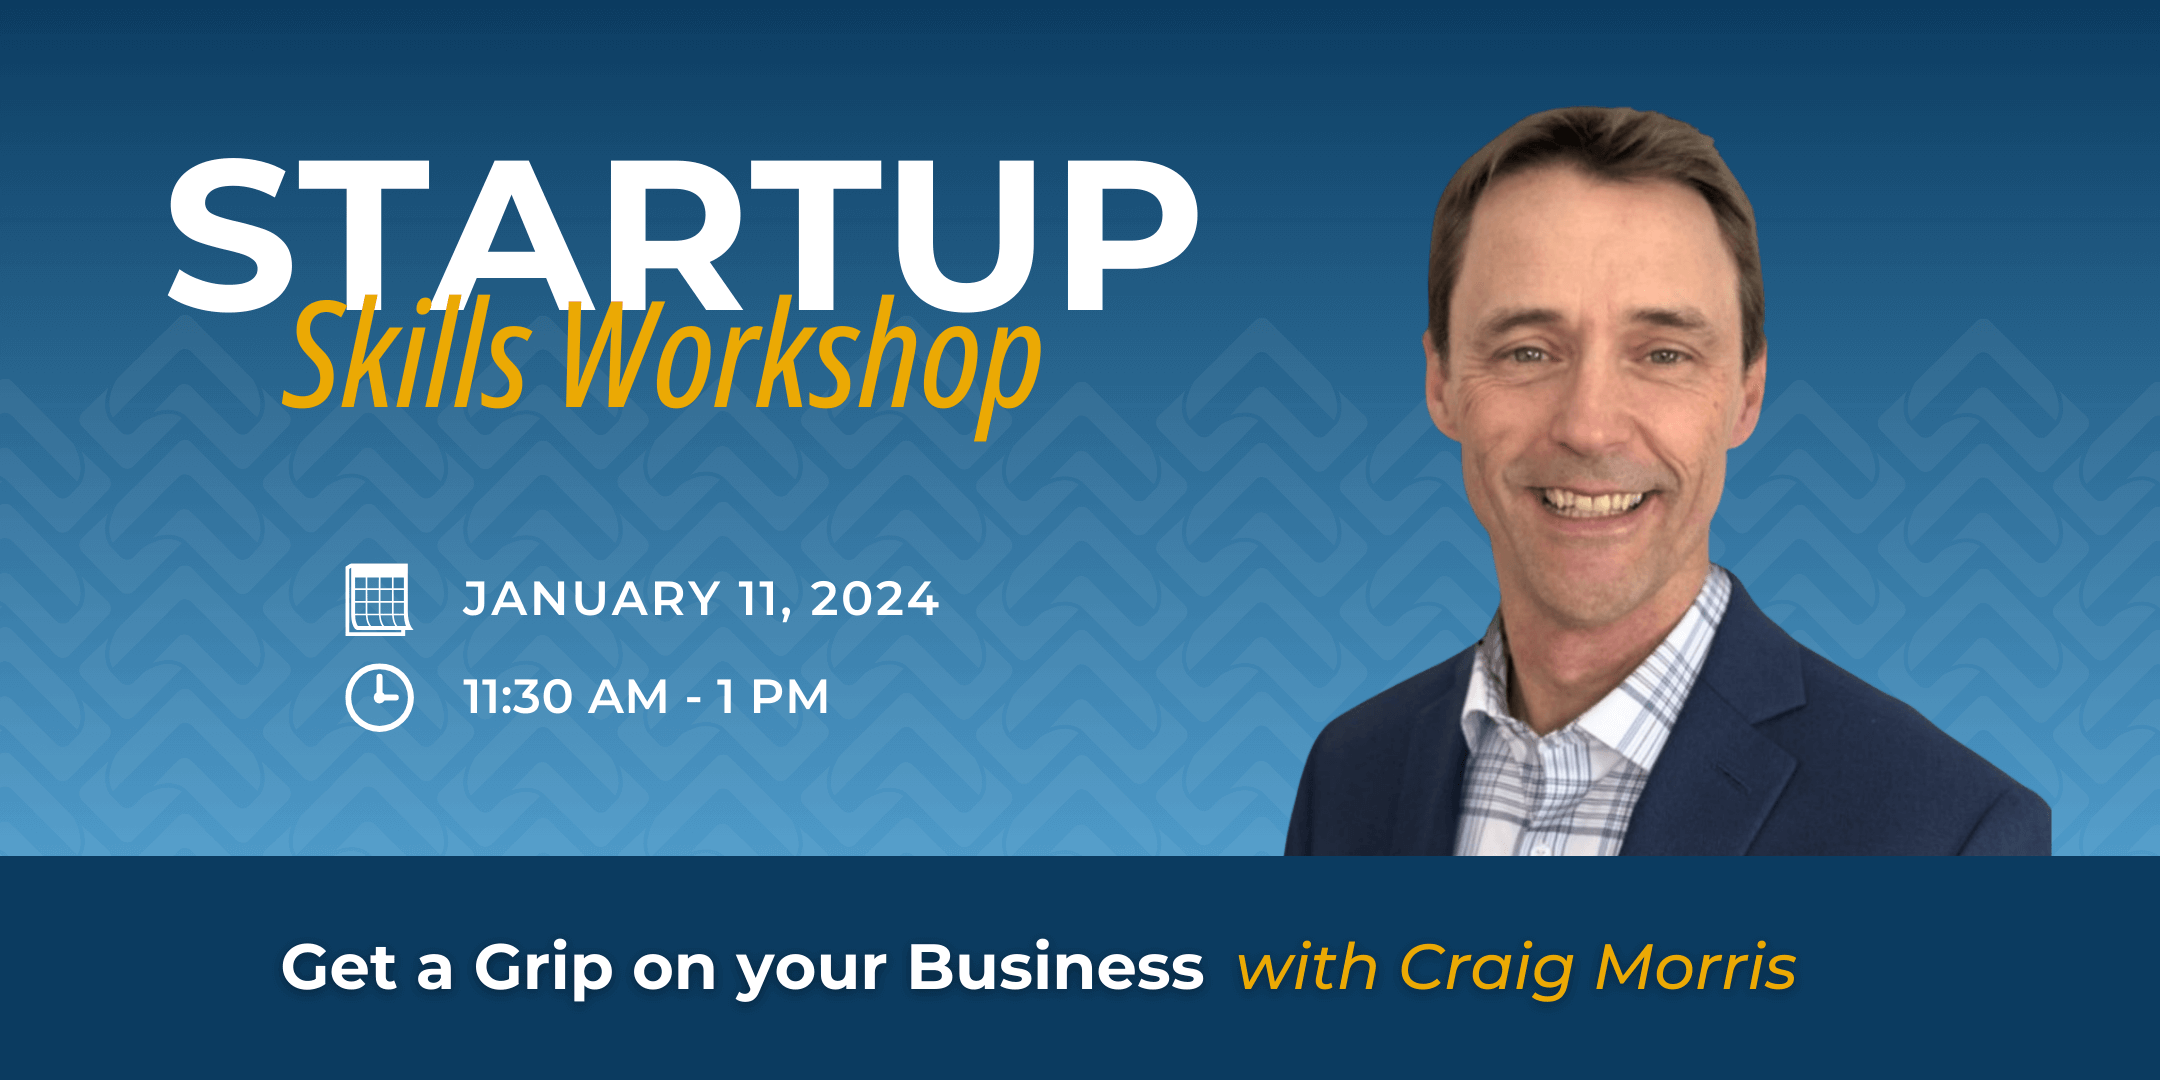 Startup Skills Workshop: Get a Grip on Your Business with Craig Morris